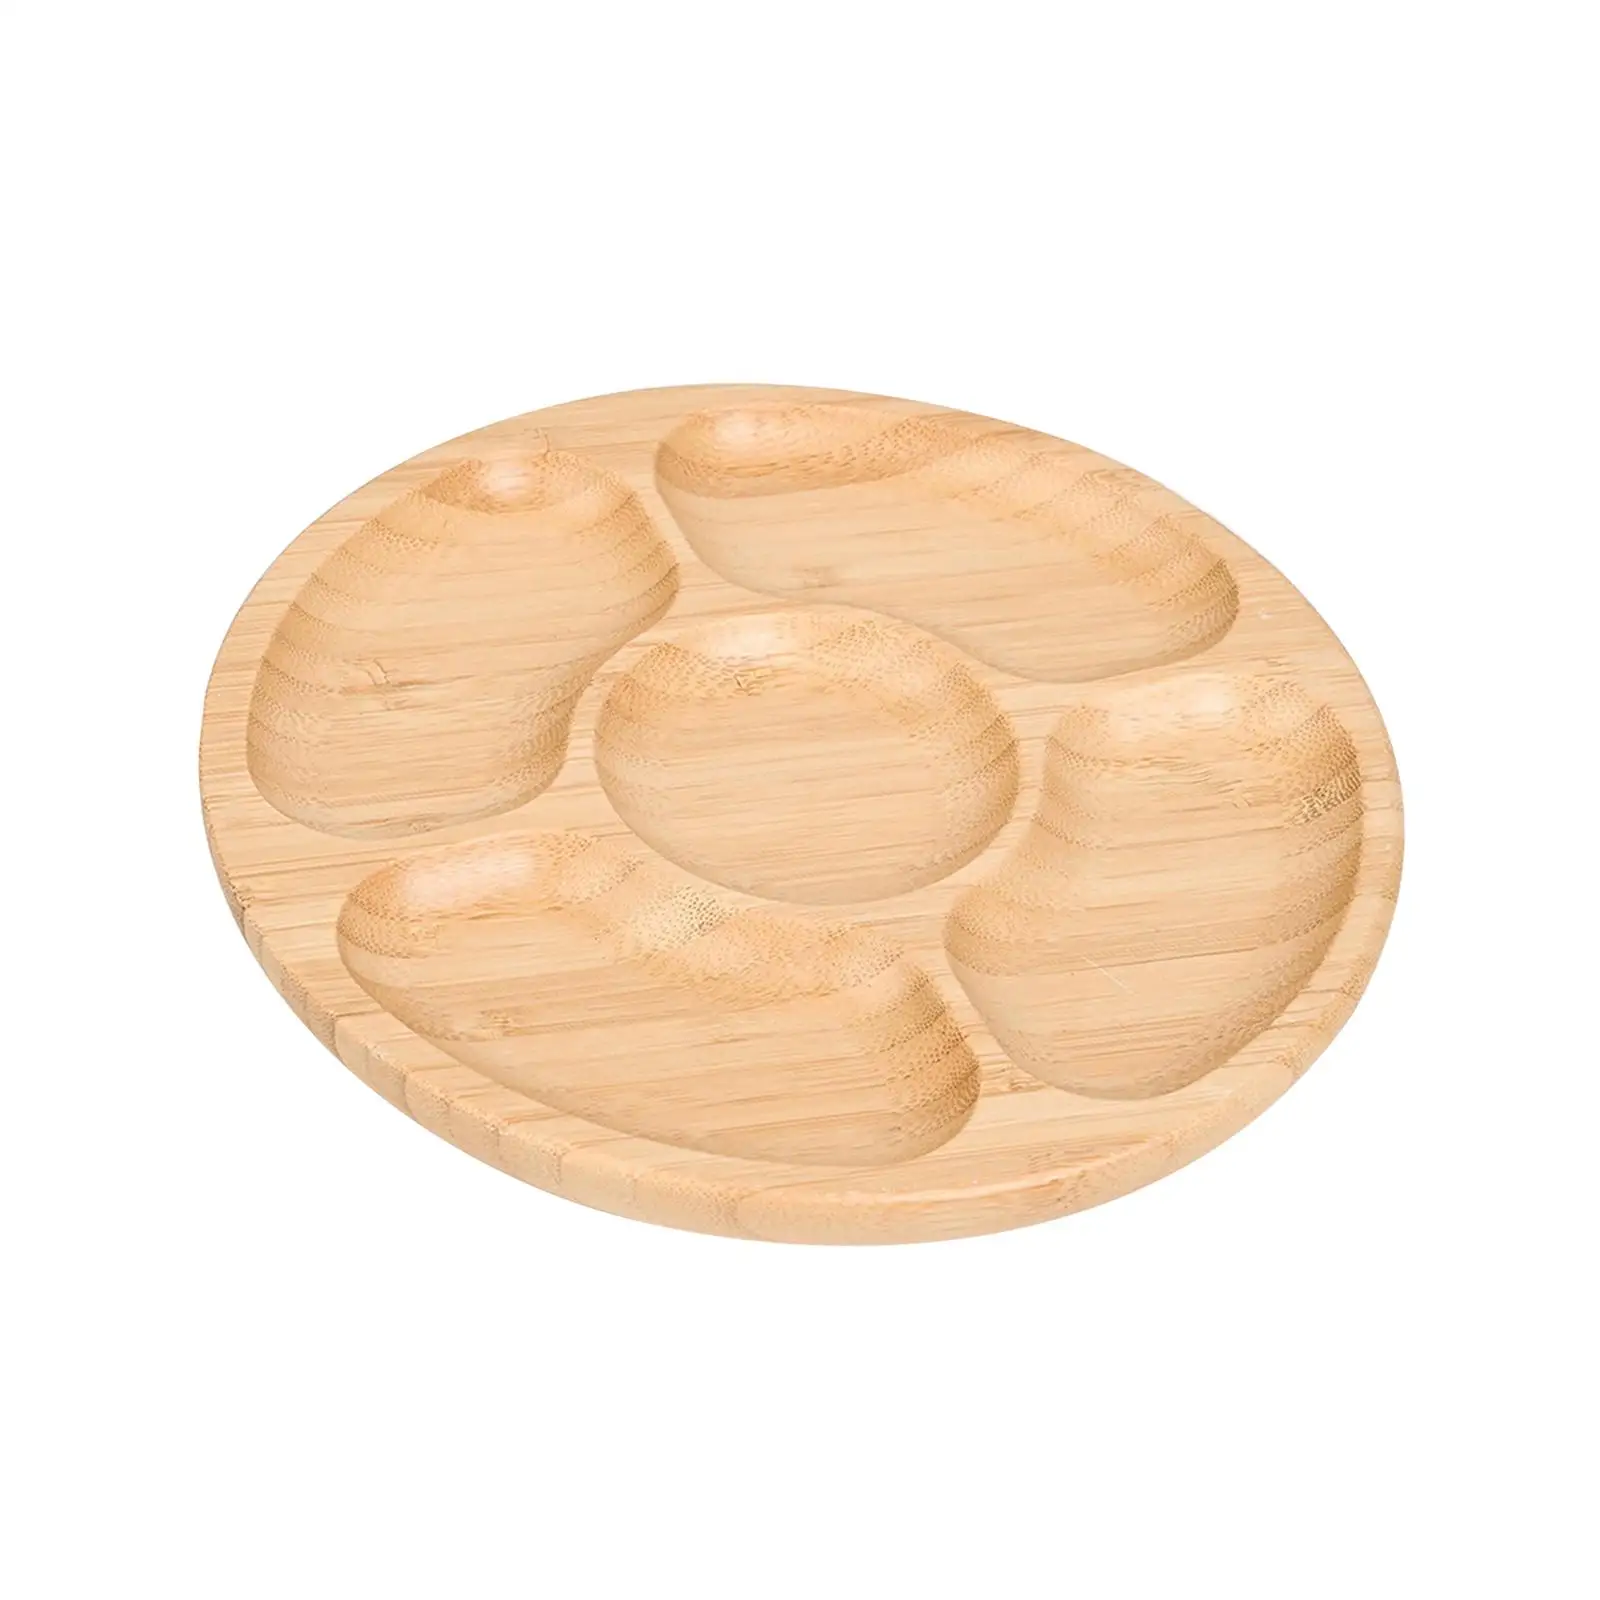 Wooden Tray Sectional Wooden Trays Family Dinner Display Cookware Wooden Food Tray for Appetizer Bread Wedding Party